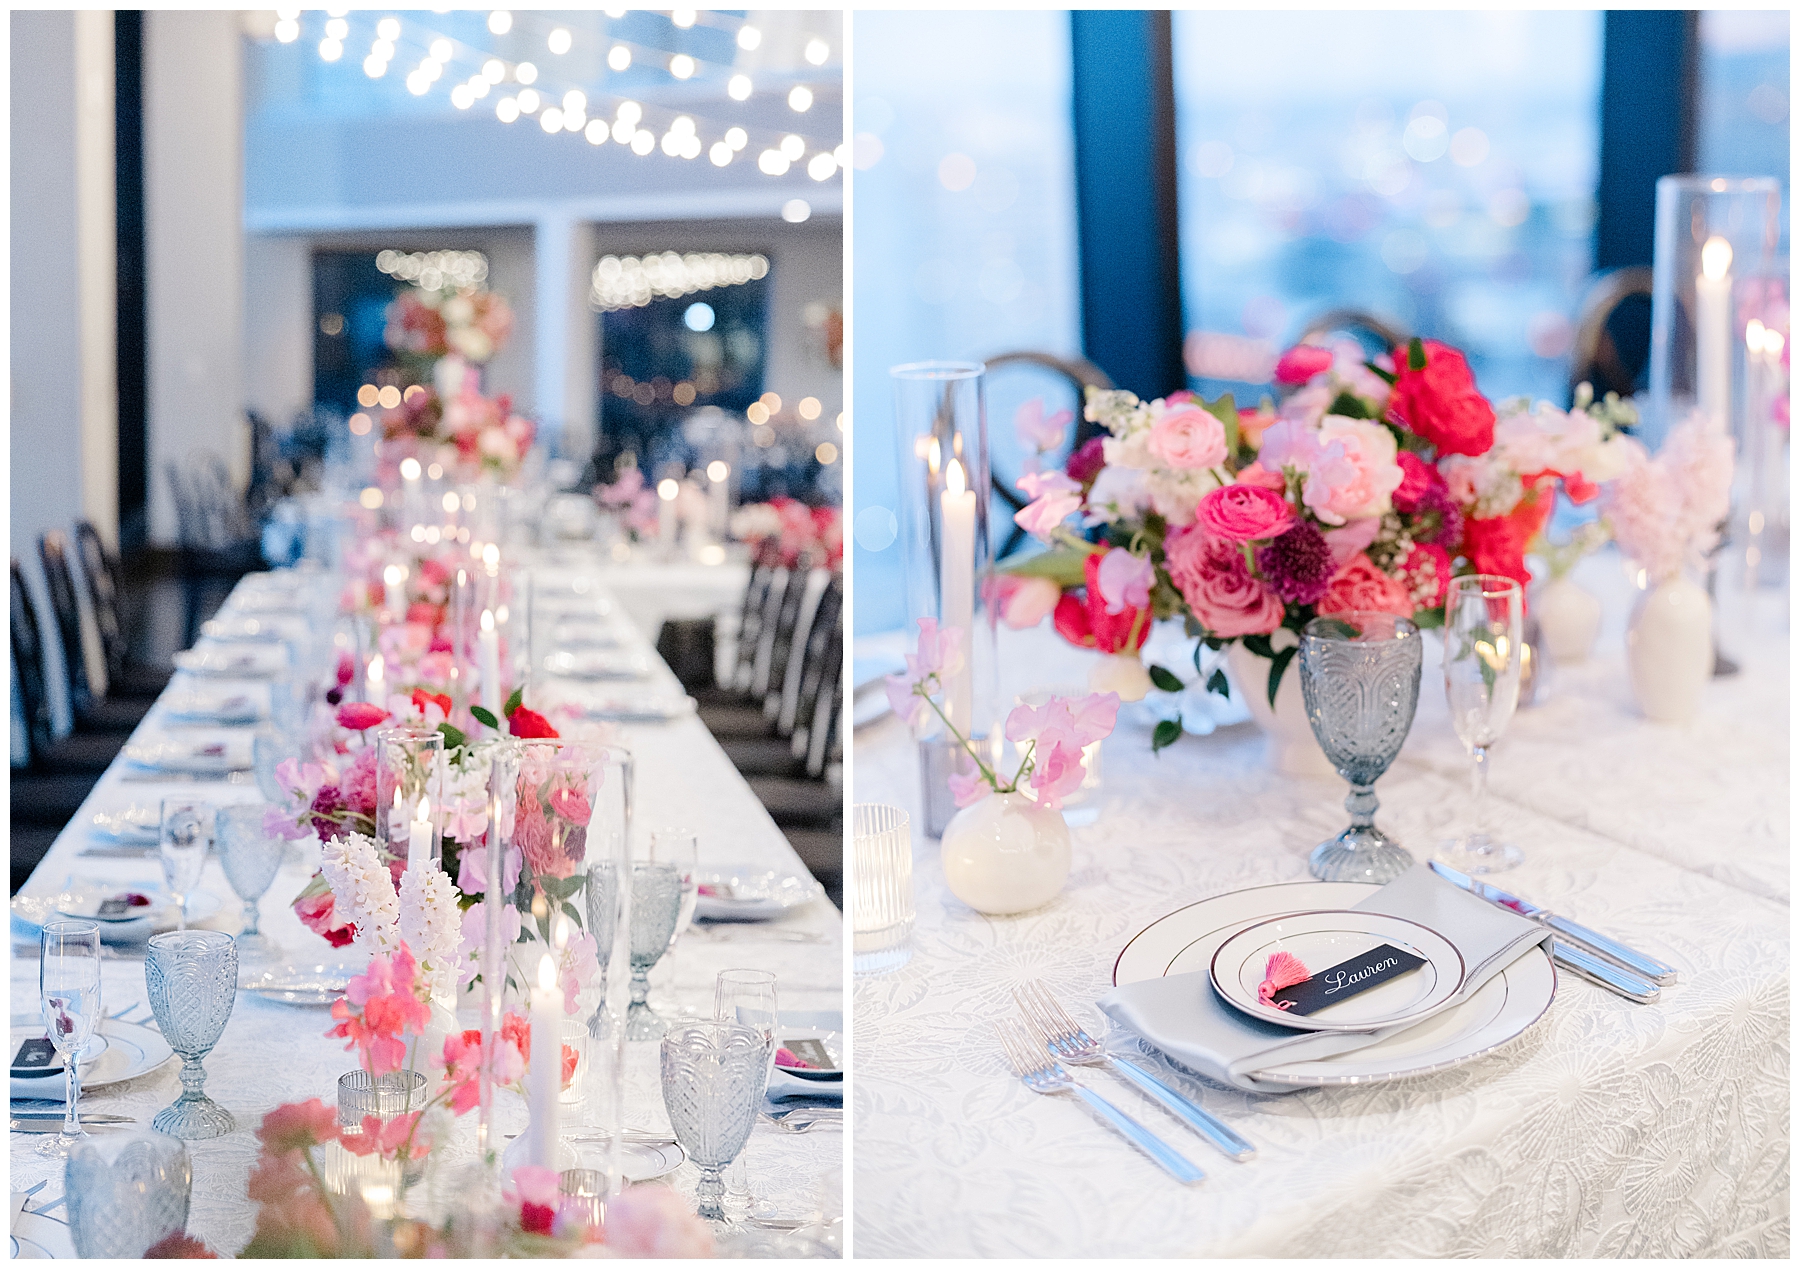 classic and elegant wedding reception details at The State Room